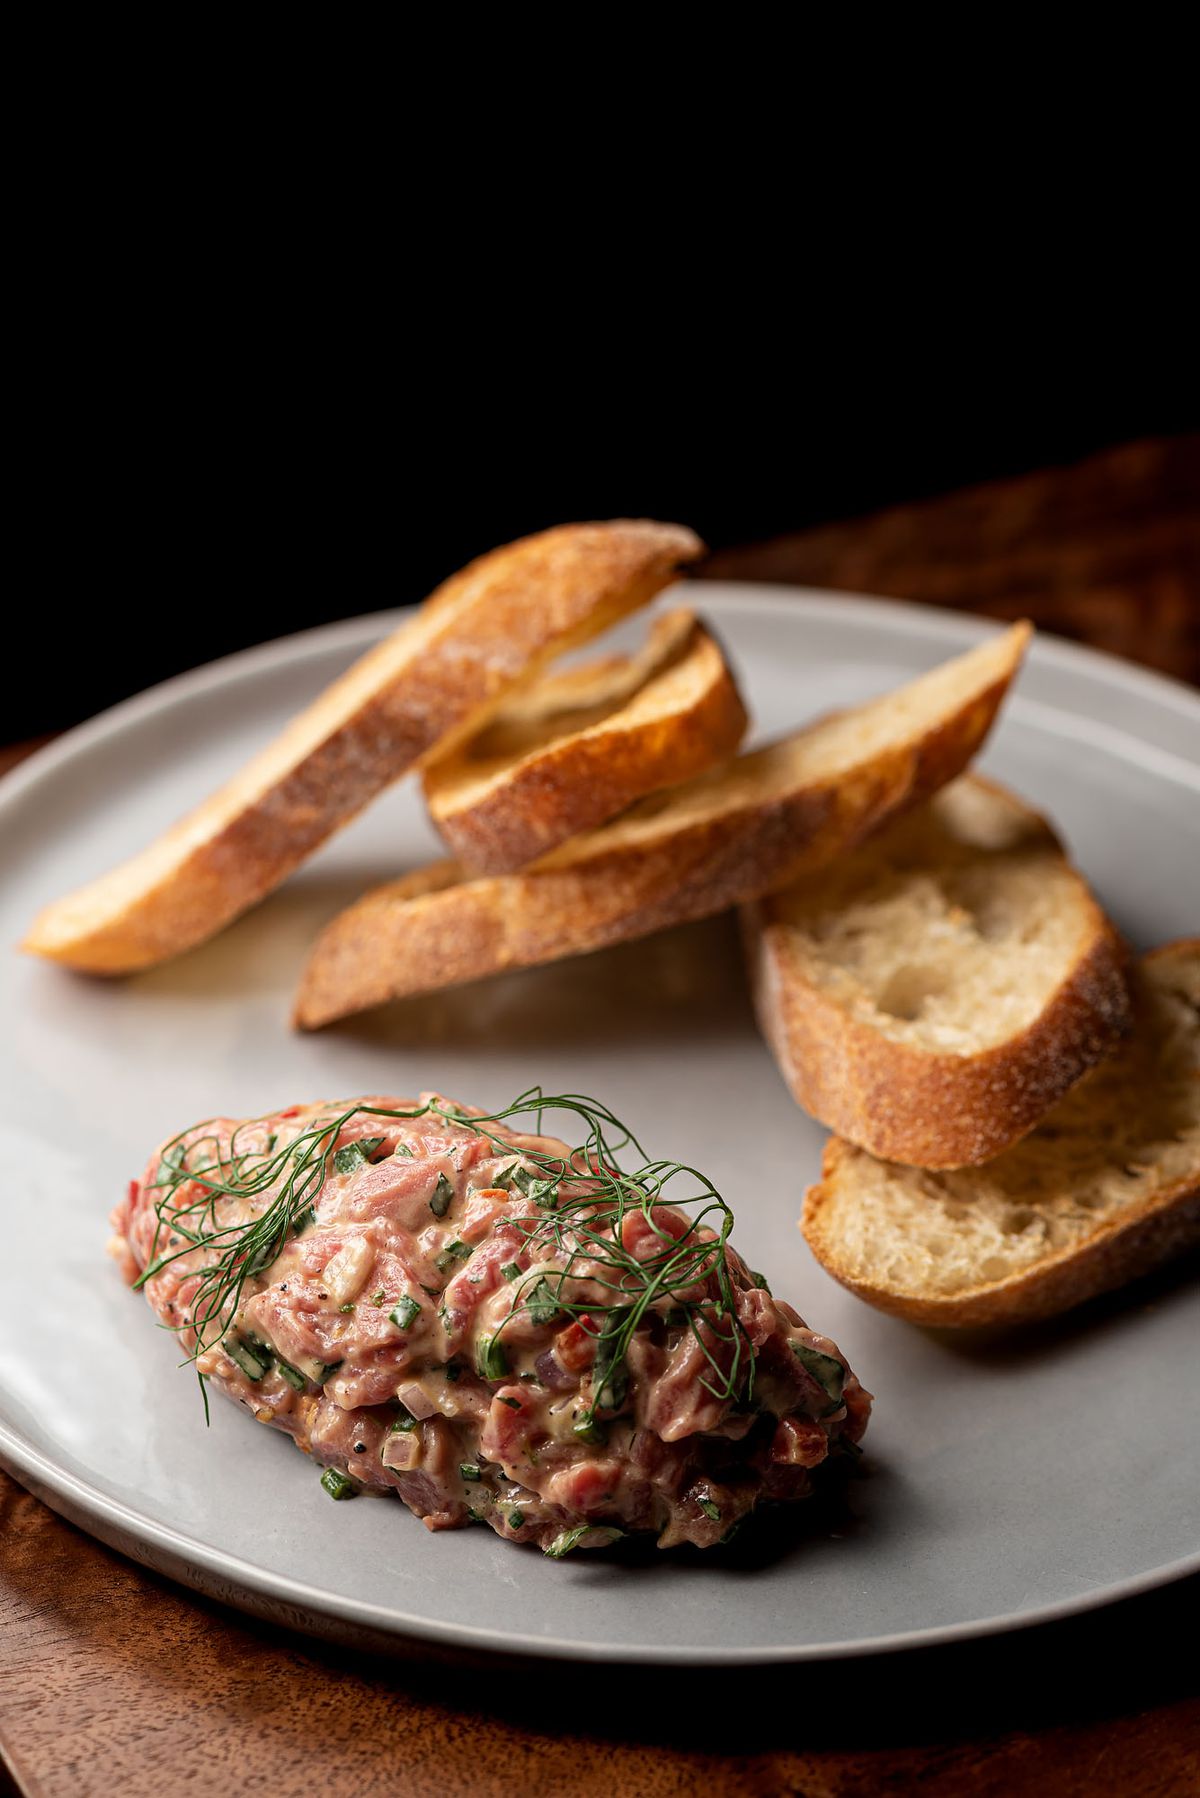 Beef tartare with slivers of baguette.